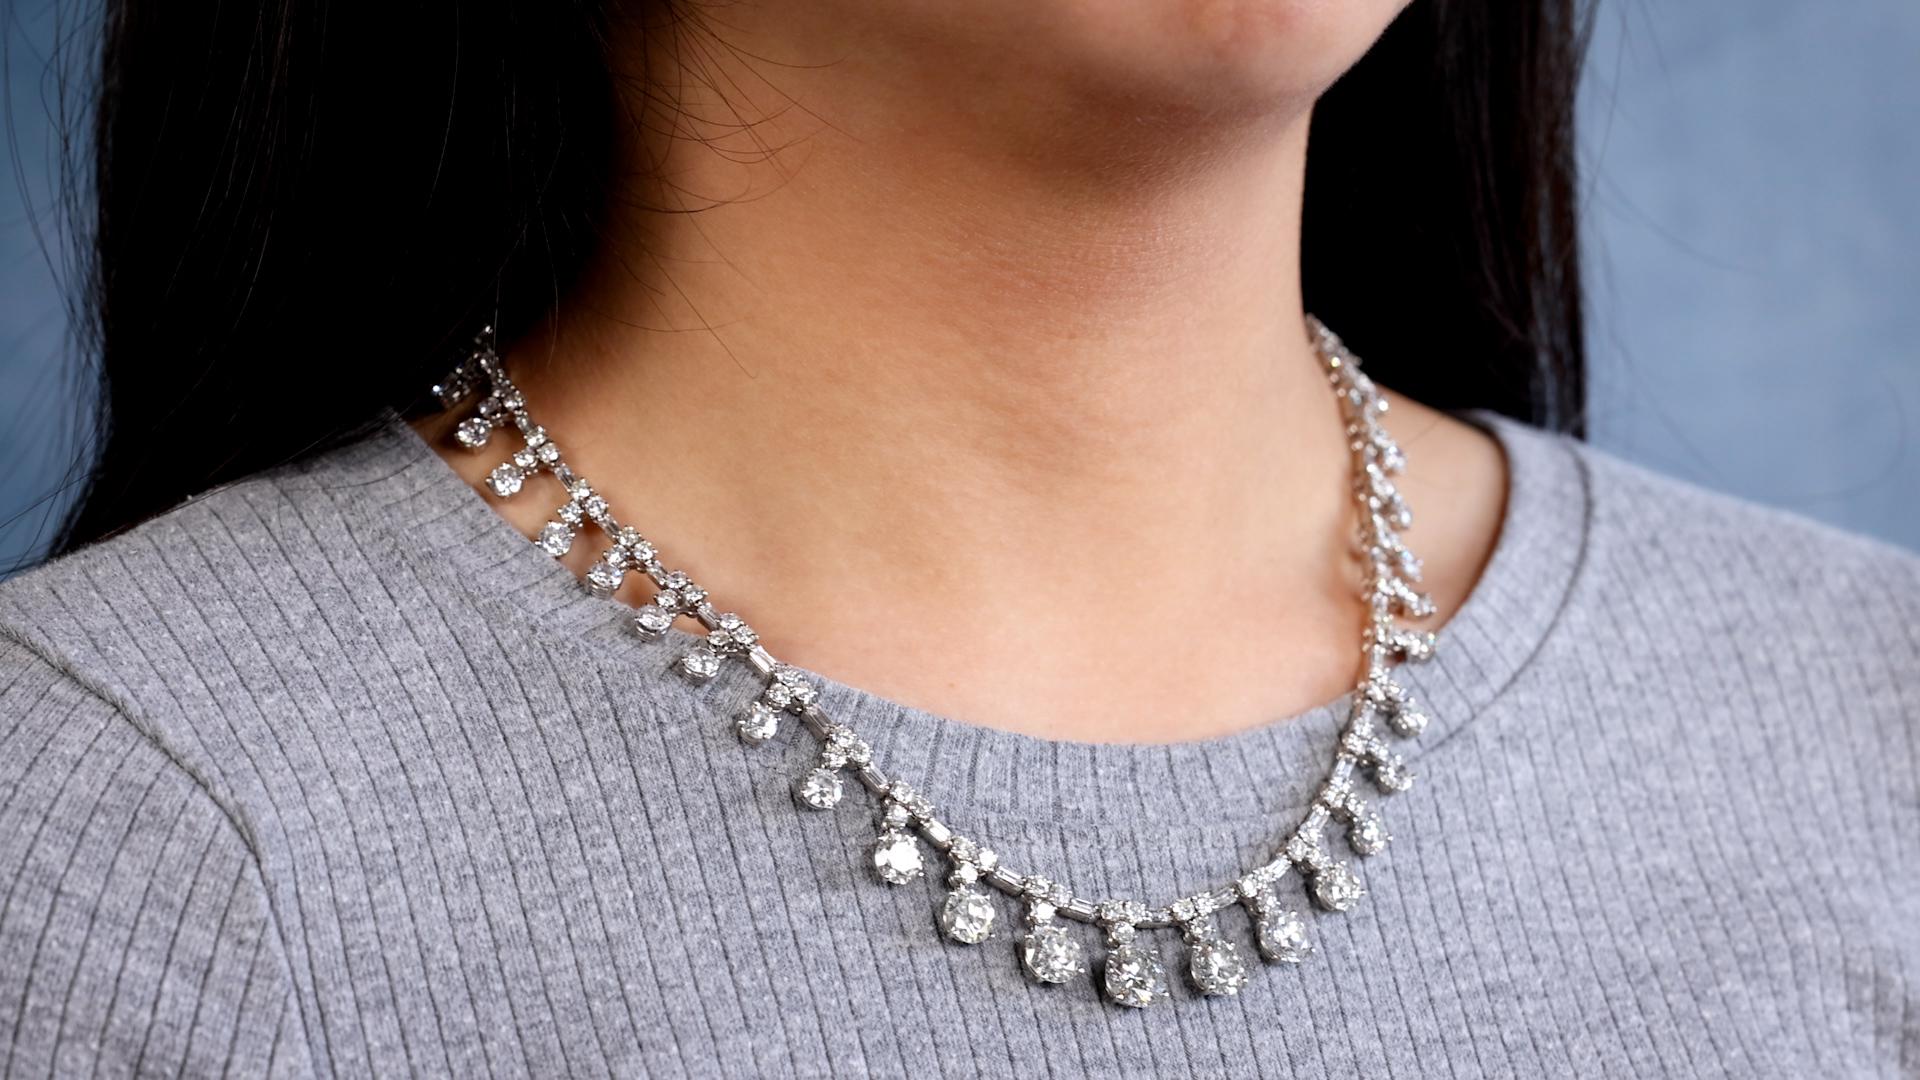 One Mid-Century French 33.30 Carat Total Weight Platinum Rivière Drop Necklace. Featuring seven transitional and round brilliant cut diamonds weighing approximately 1.02 carats, 1.30 carats, 1.78 carats, 2.23 carats, 1.74 carats, 1.55 carats, and